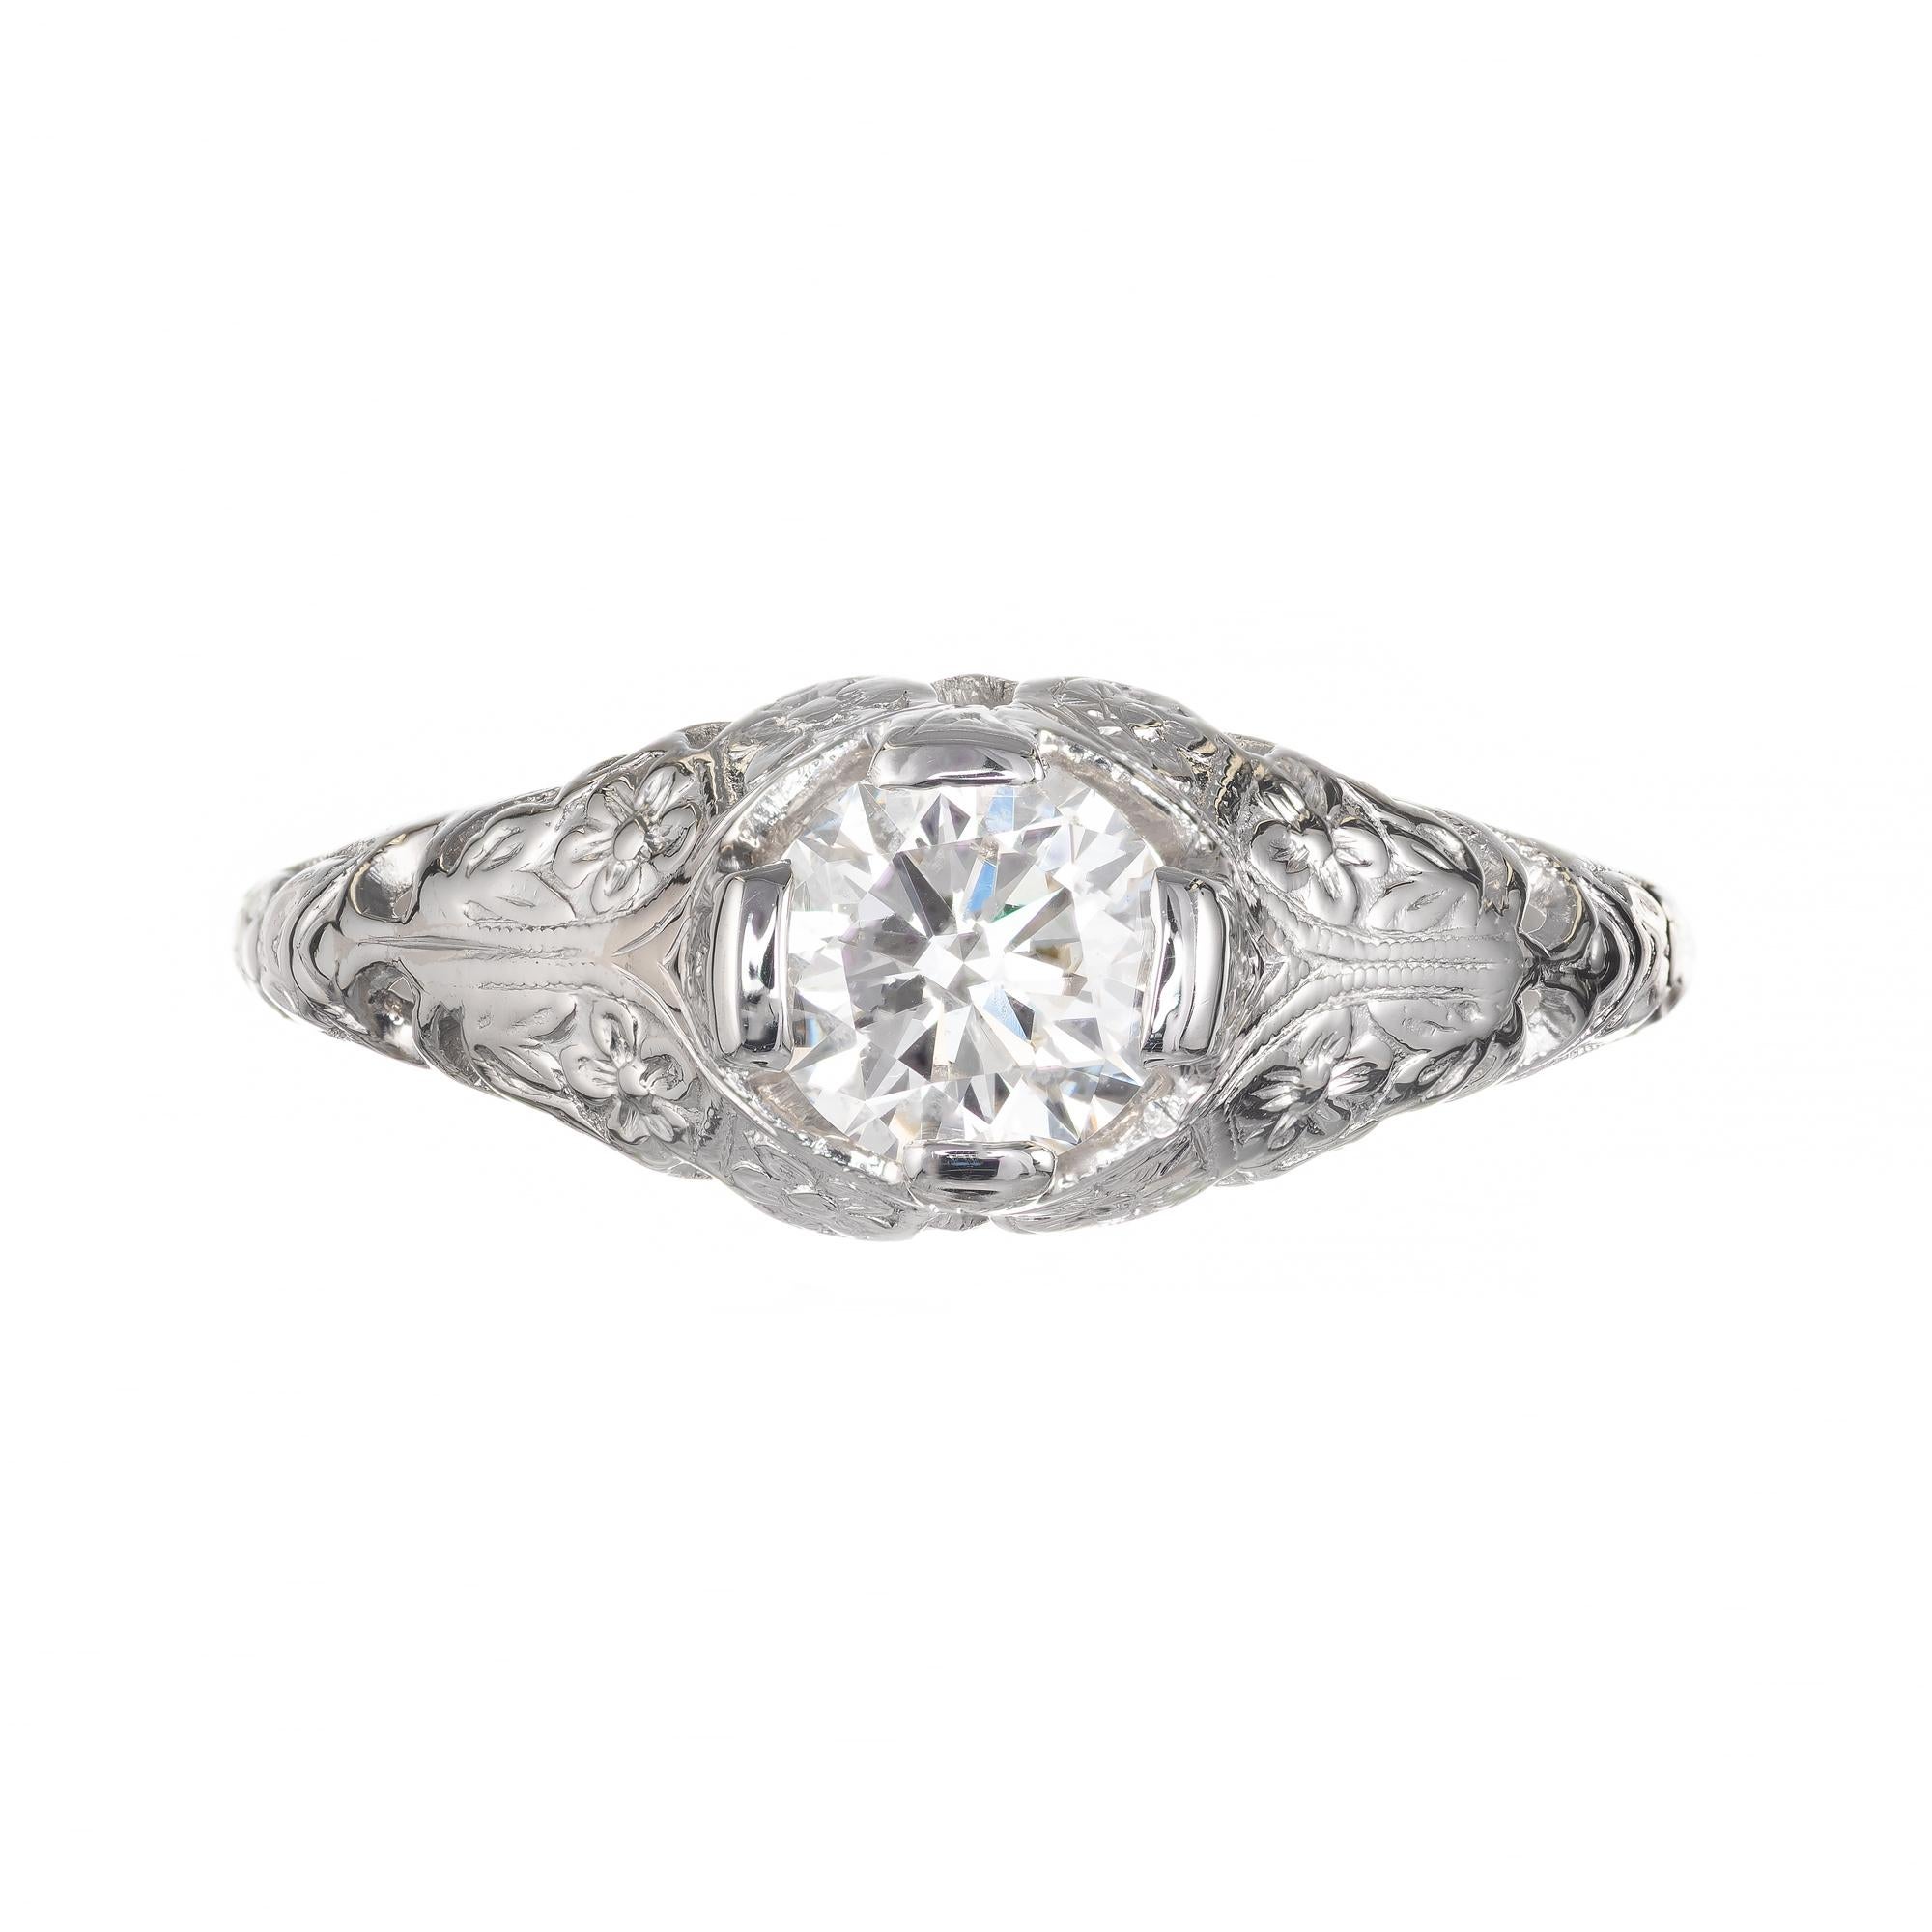 Vintage 1940s filigree diamond engagement ring set with a bright sparkly ideal cut original center diamond in platinum. EGL certified

1 round brilliant cut I-J VS diamond, Approximate .56cts EGL Certificate # 400125914D
Size 6 and sizable 
Platinum